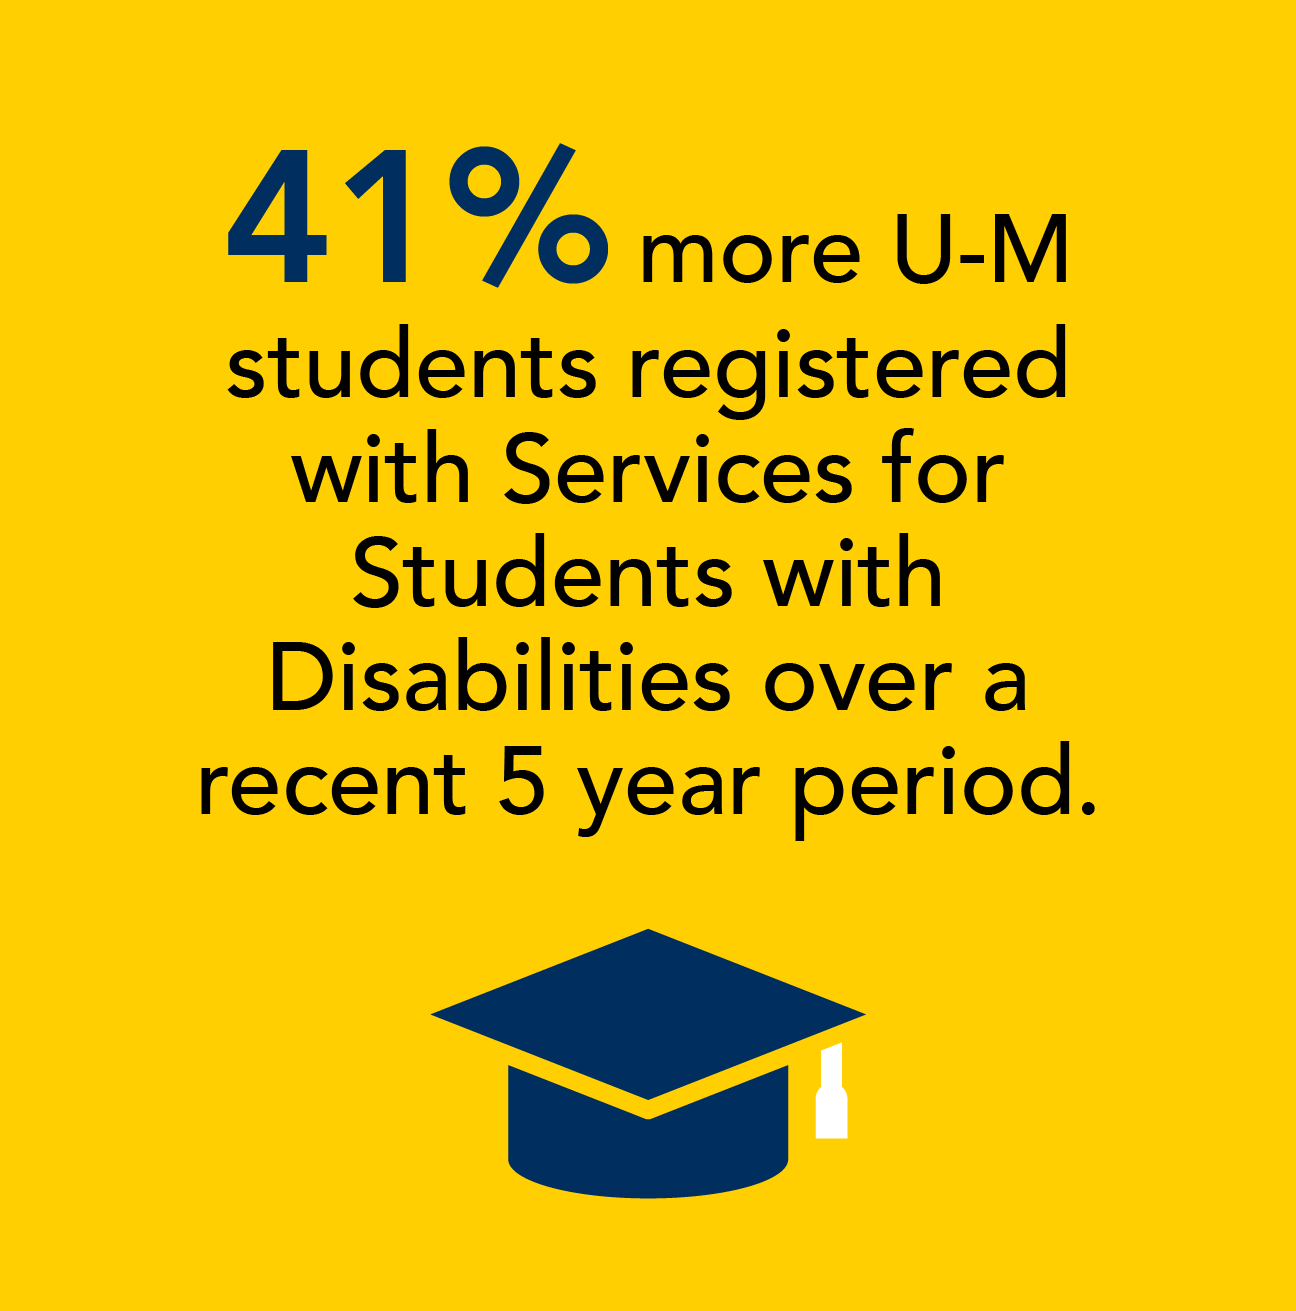 41% more U-M students registered with Services for Students with Disabilities over a recent 5 year period.